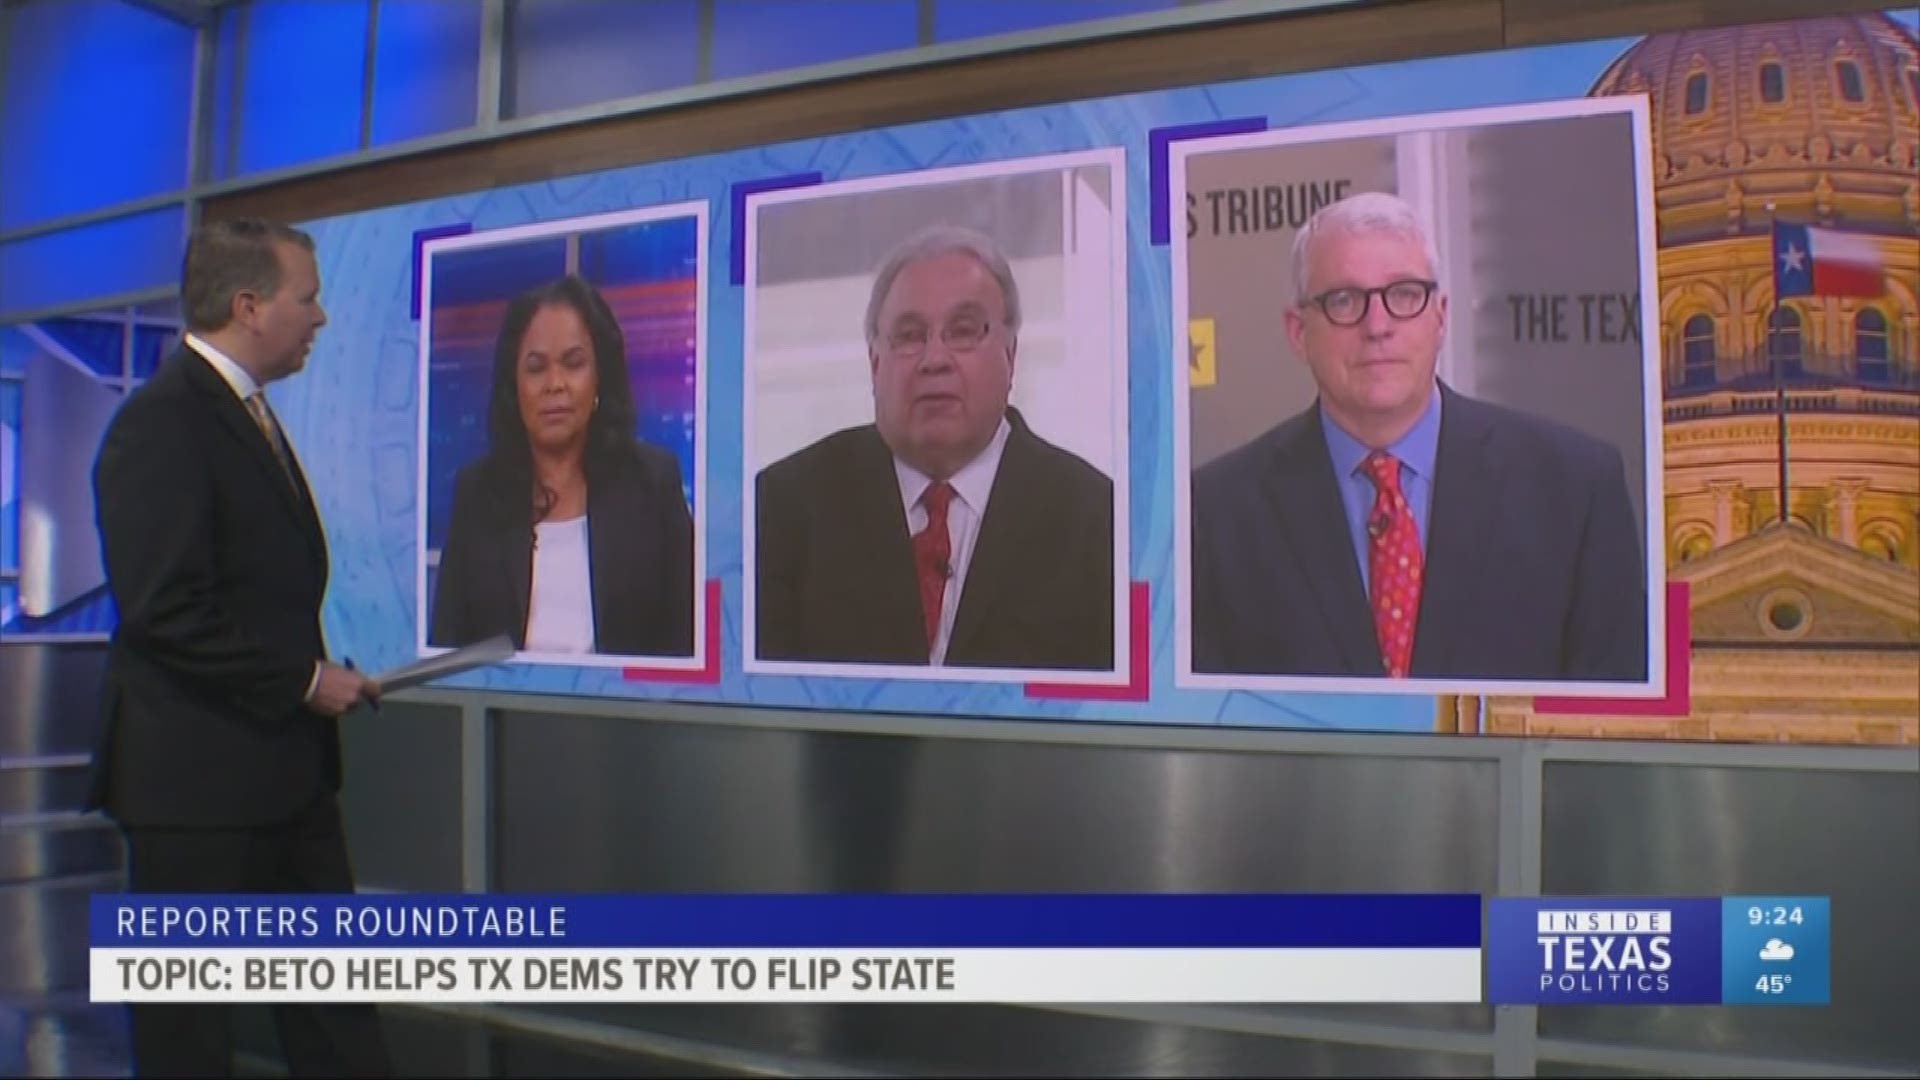 Ross Ramsey, Bud Kennedy, and Berna Dean Steptoe, WFAA's political producer, joined host Jason Whitely to talk about Beto O’Rourke's campaigning in Texas elections.